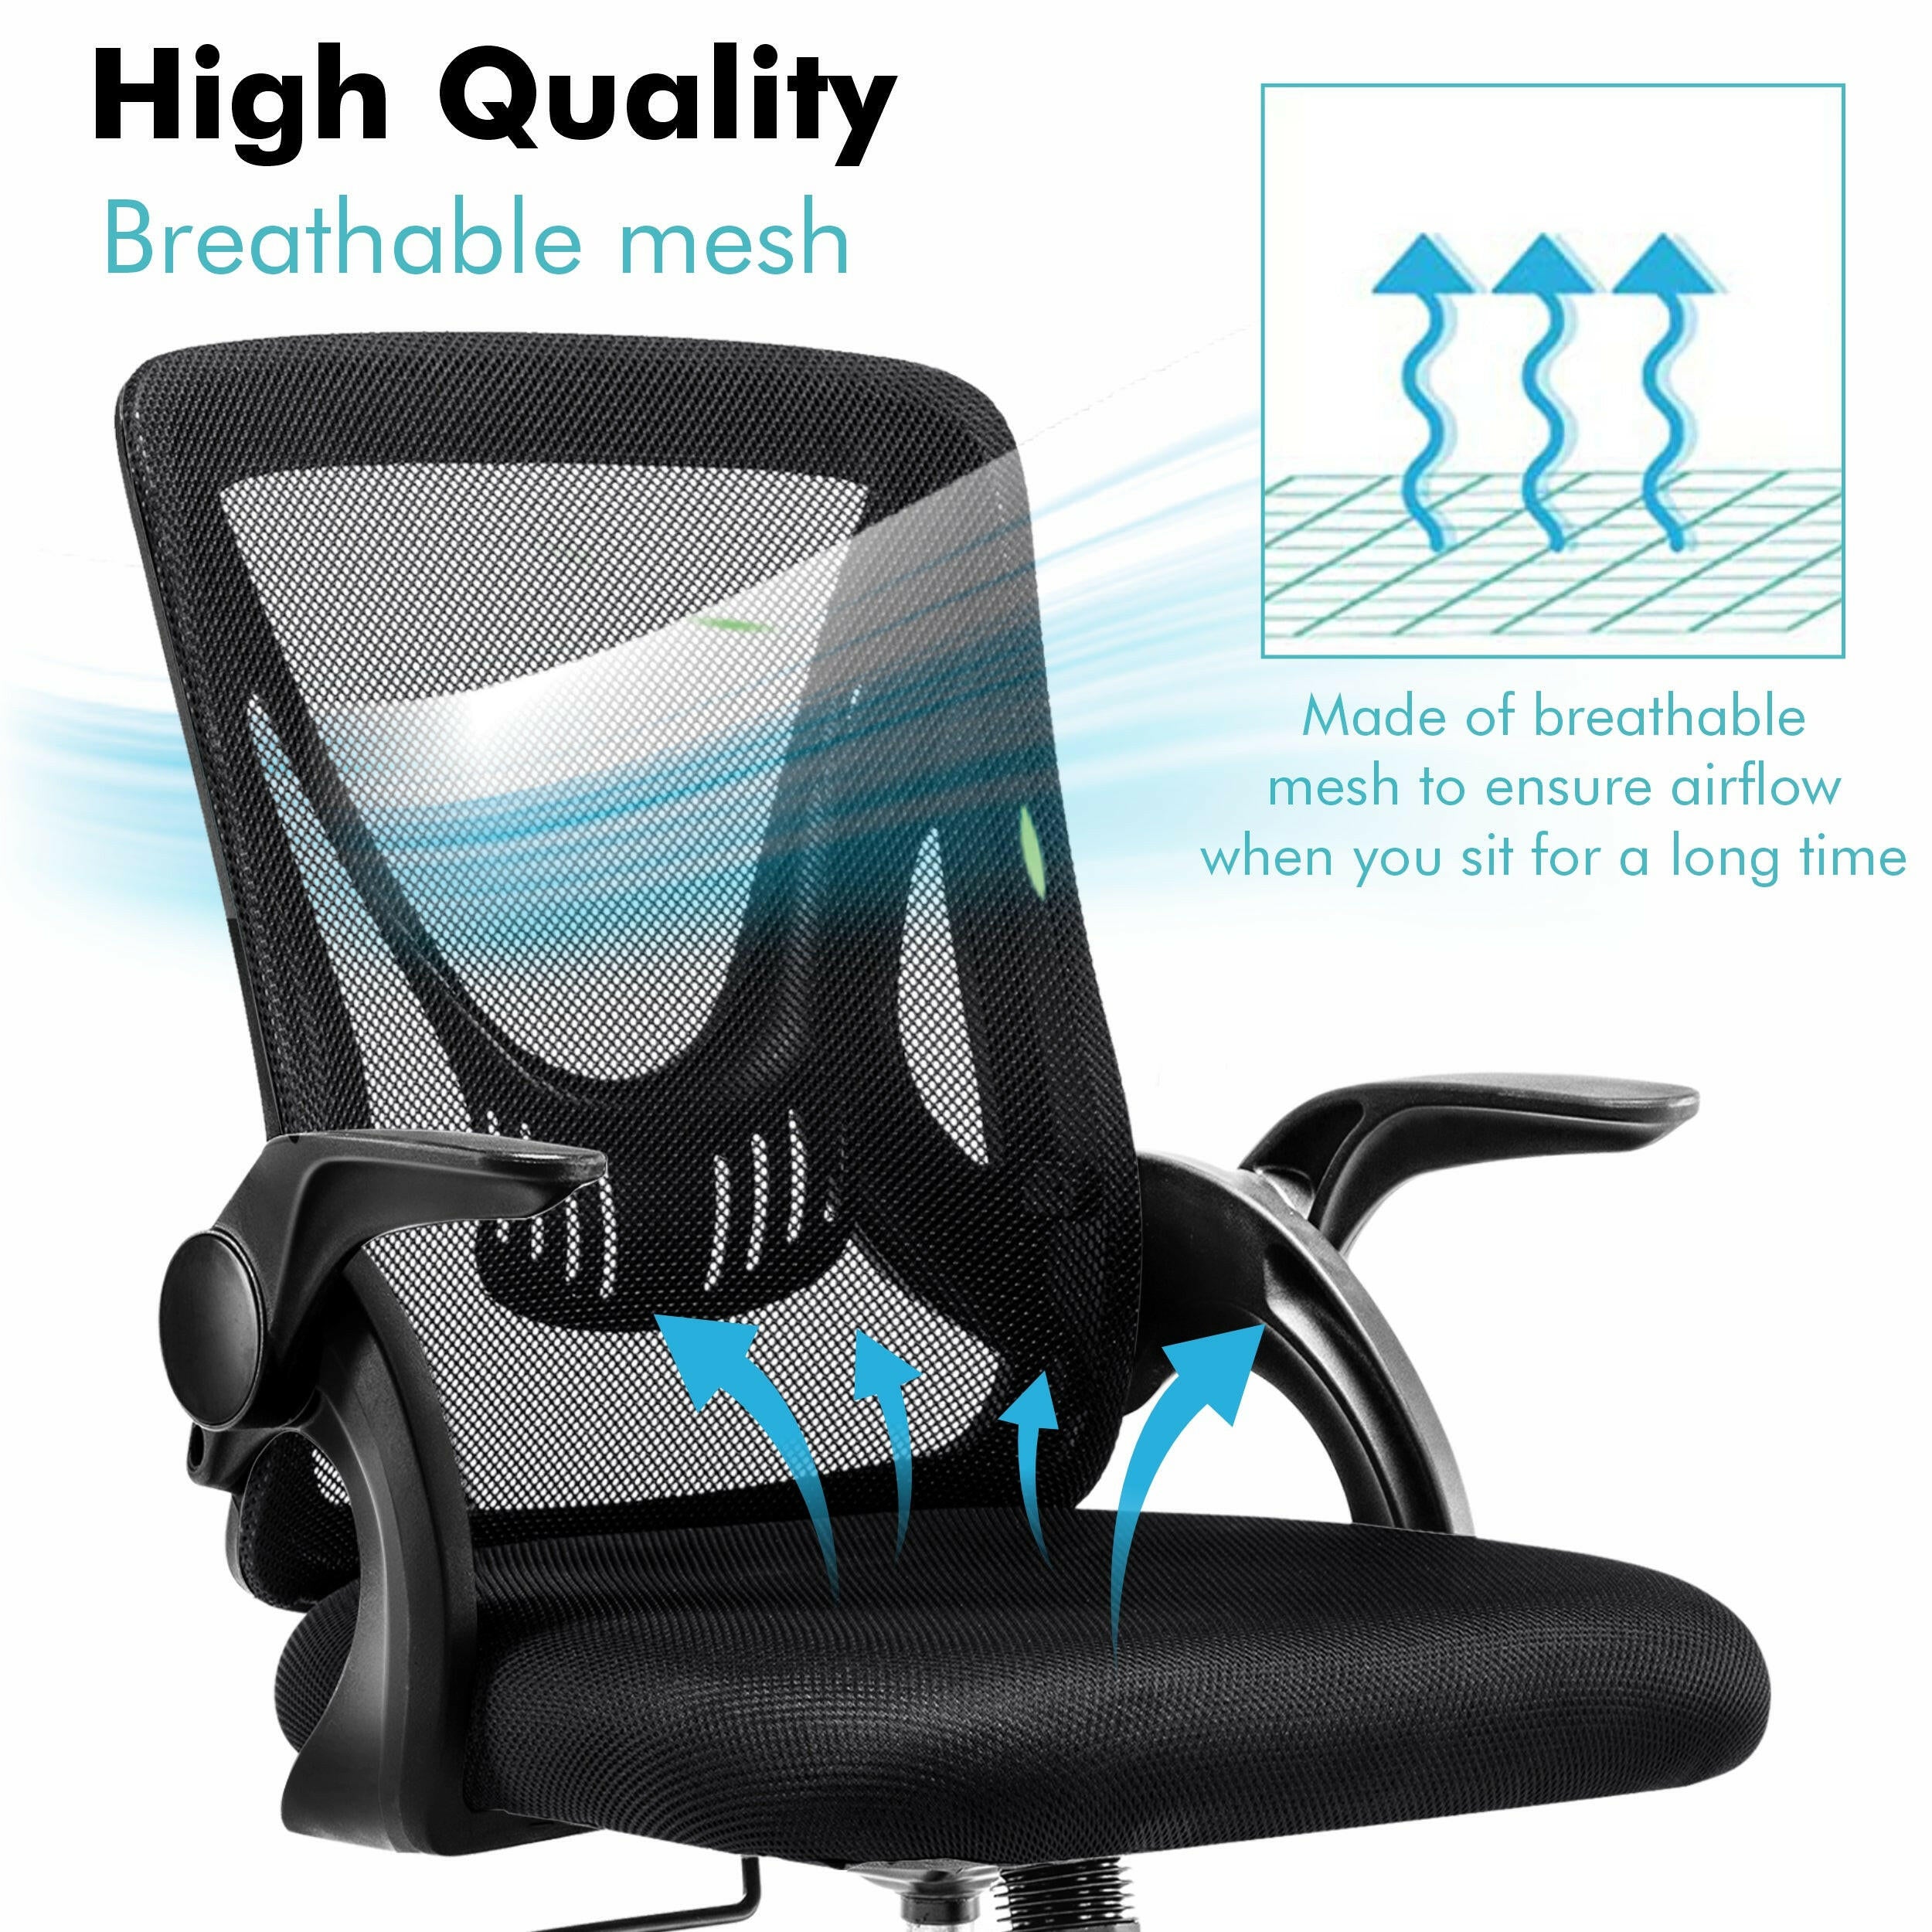 great office chairs